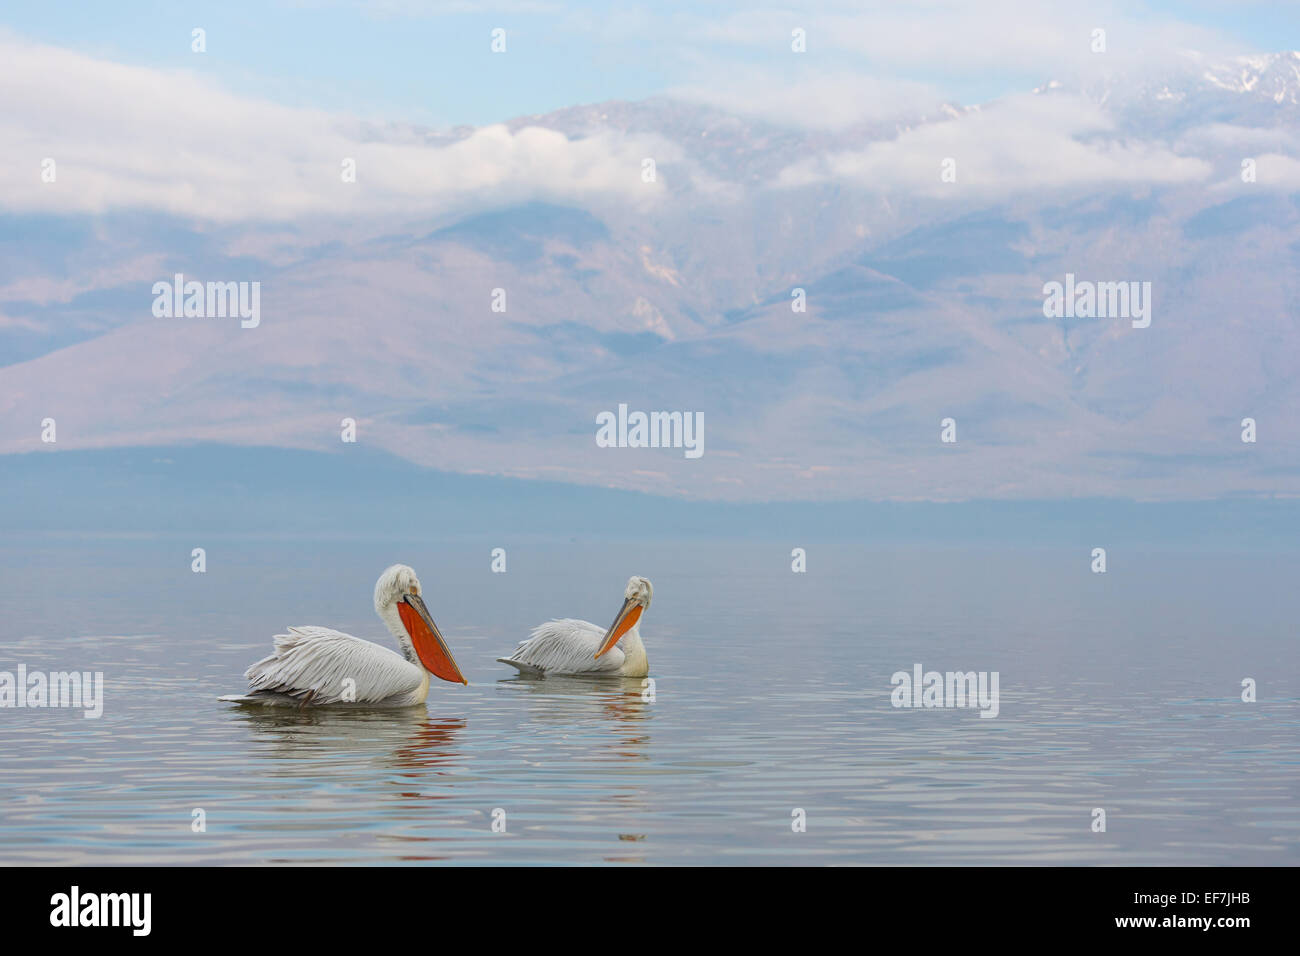 Two Dalmatian Pelicans (Pelecanus crispus) on Lake Kerkini in Northern Greece with the Belles mountains in the background that b Stock Photo